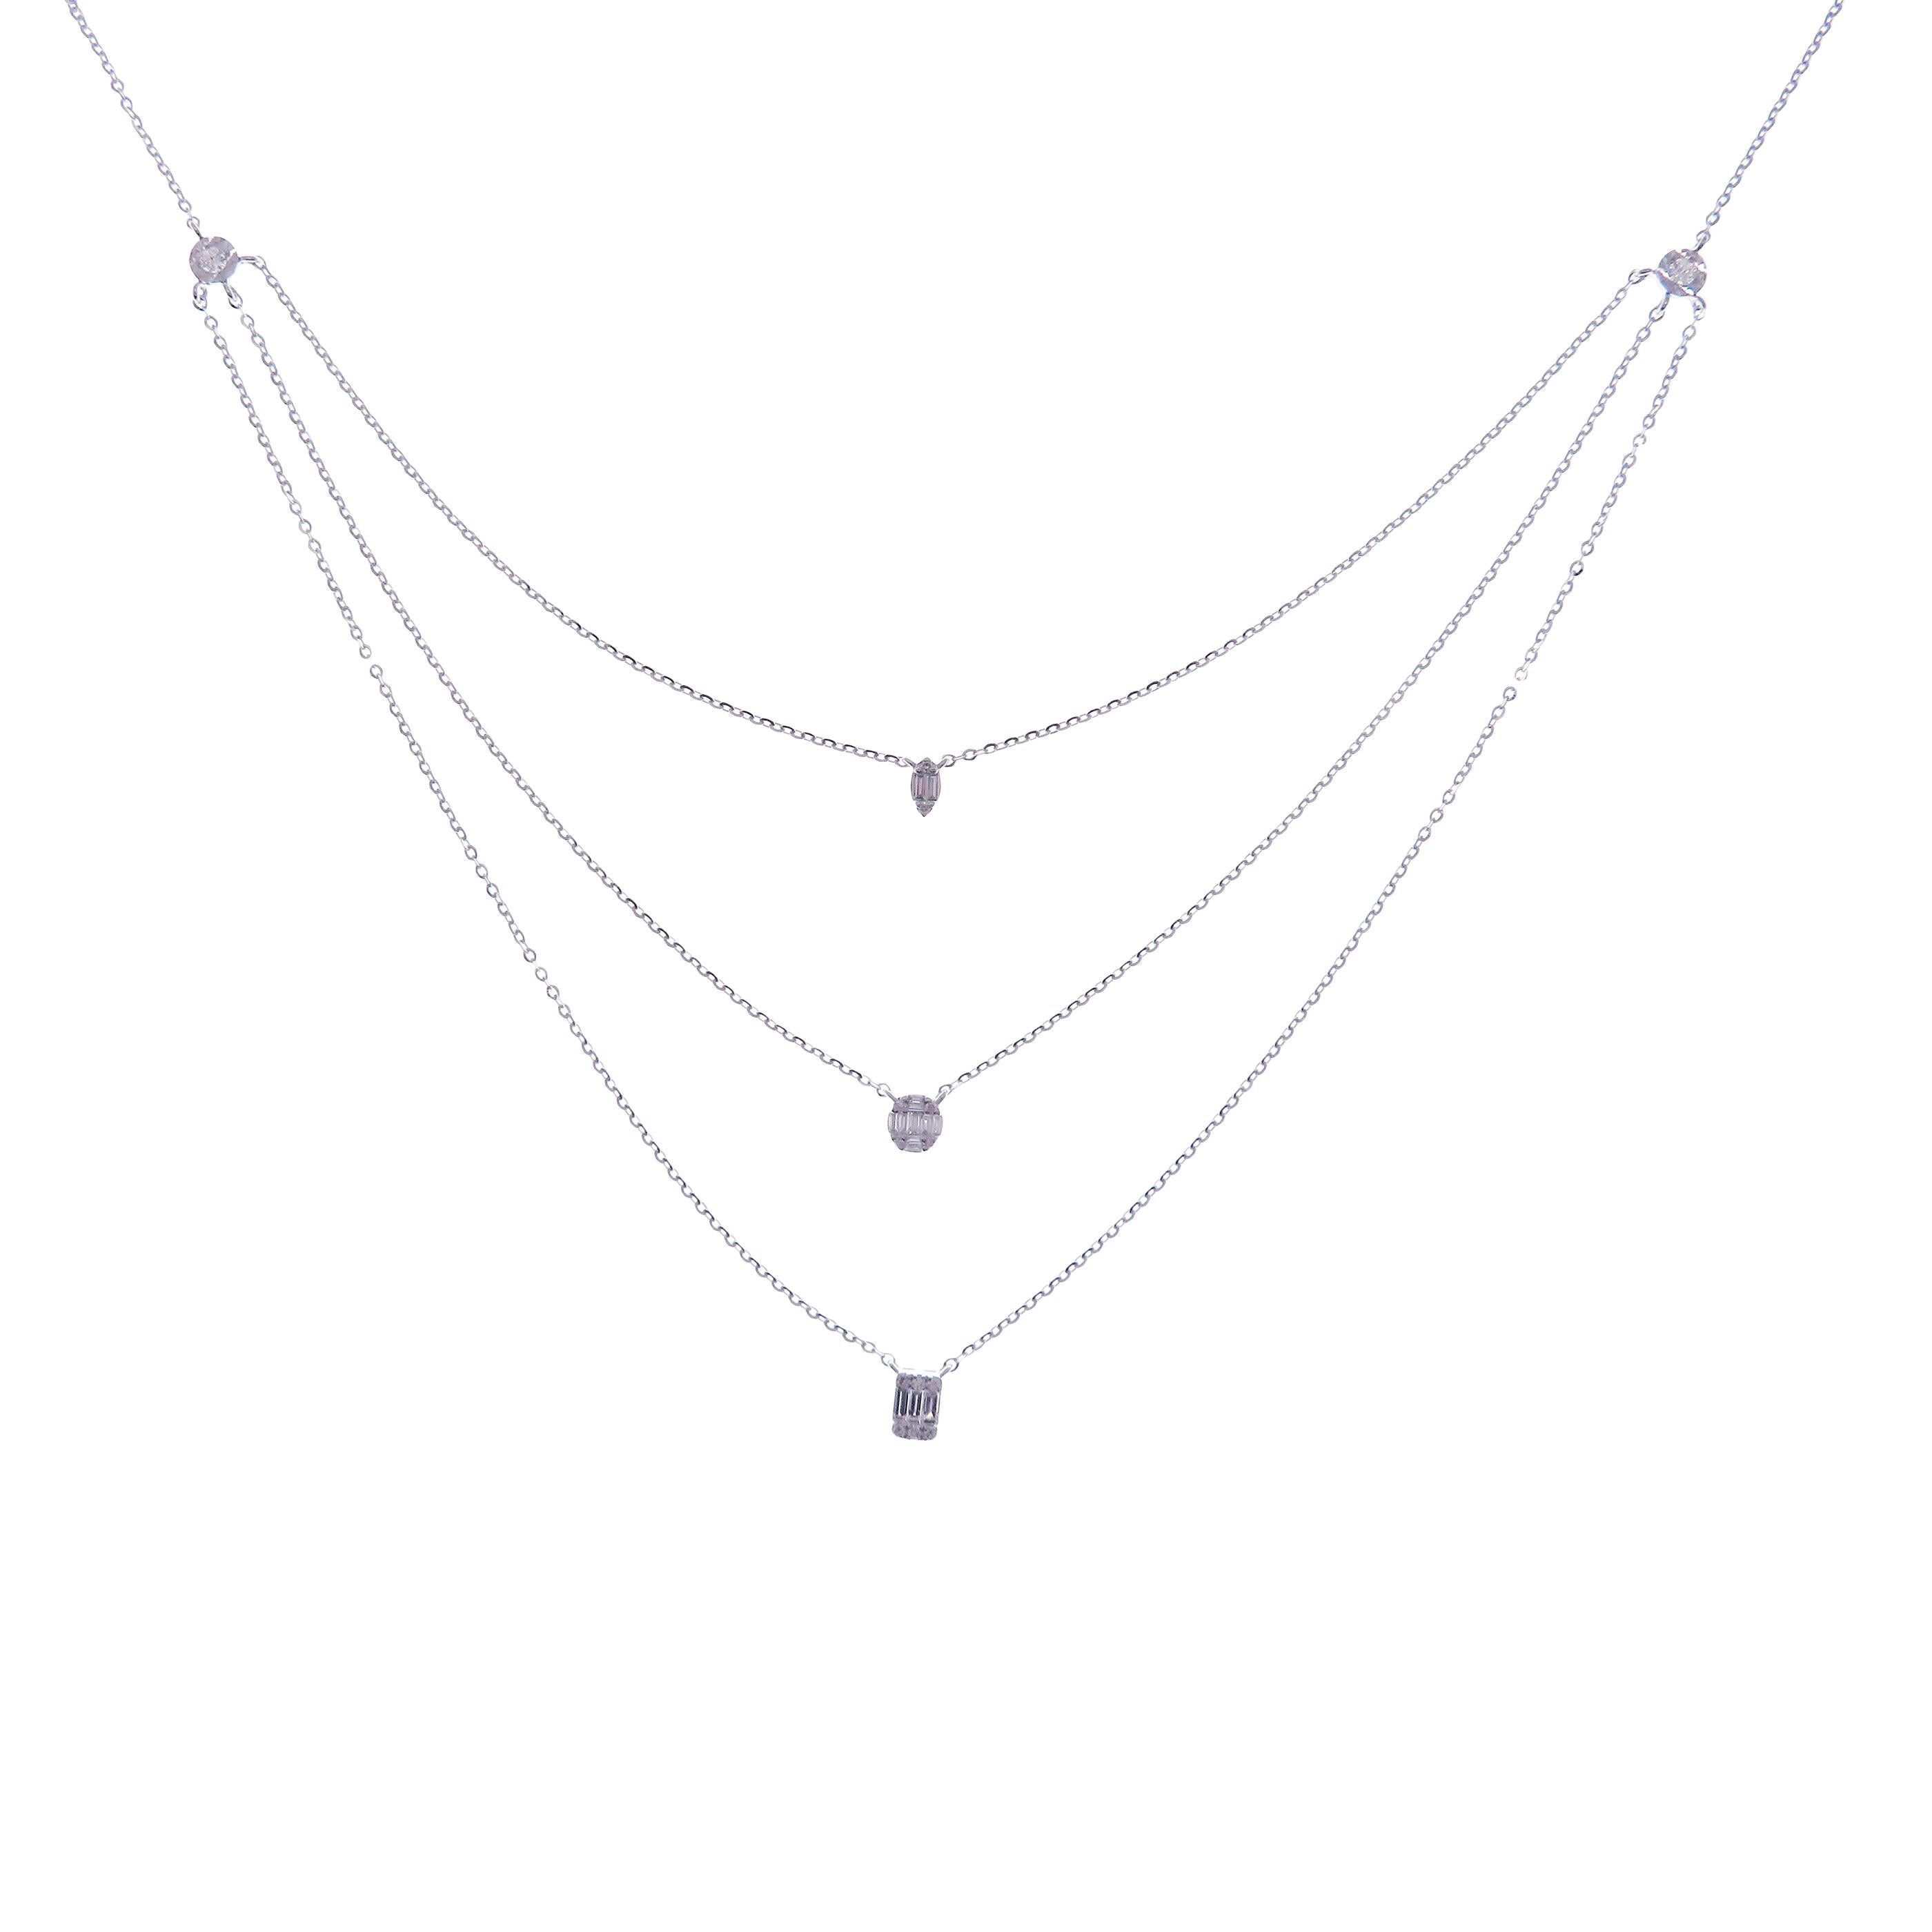 This casual triple strand necklace is crafted in 18-karat white gold, weighing approximately 0.43 total carats of SI Quality white diamond. 

Necklace is 16